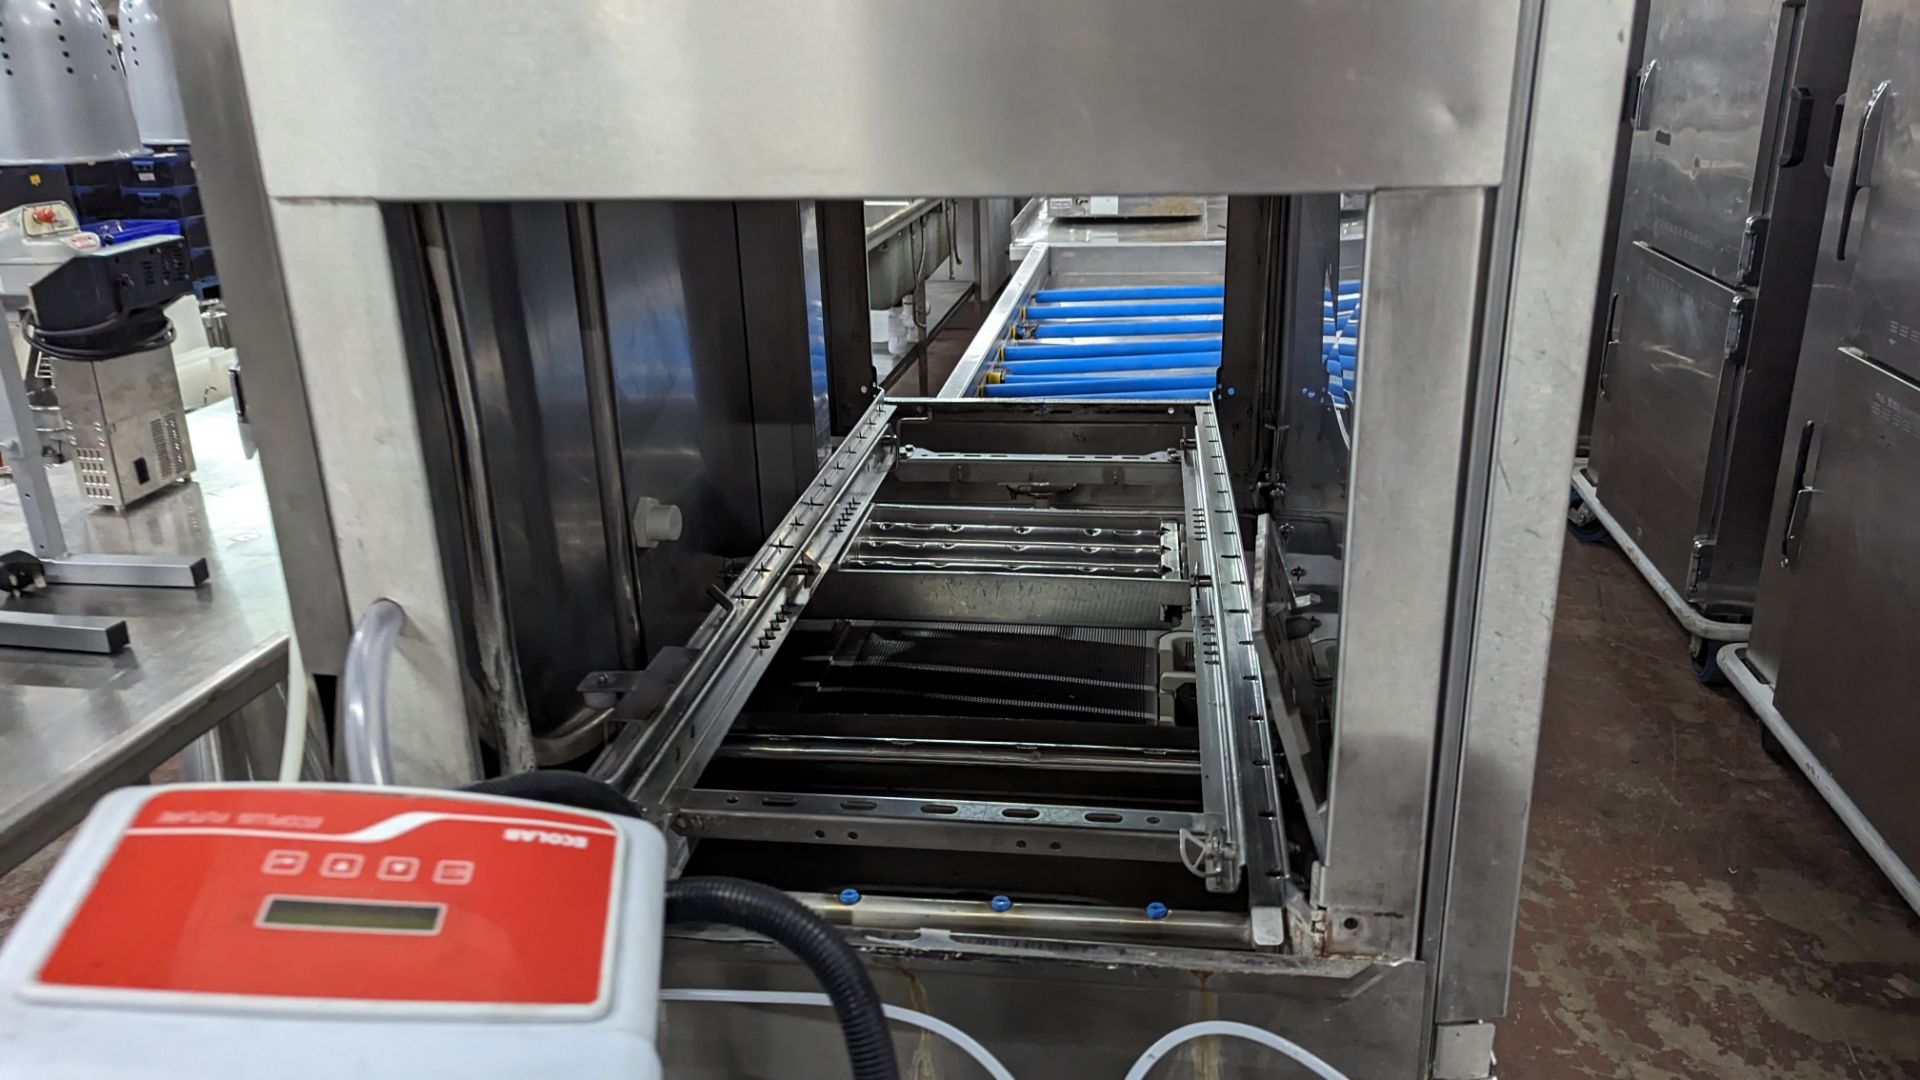 Hobart Ecomax Plus large stainless steel commercial pass through dishwasher with L shaped feed incor - Image 15 of 32